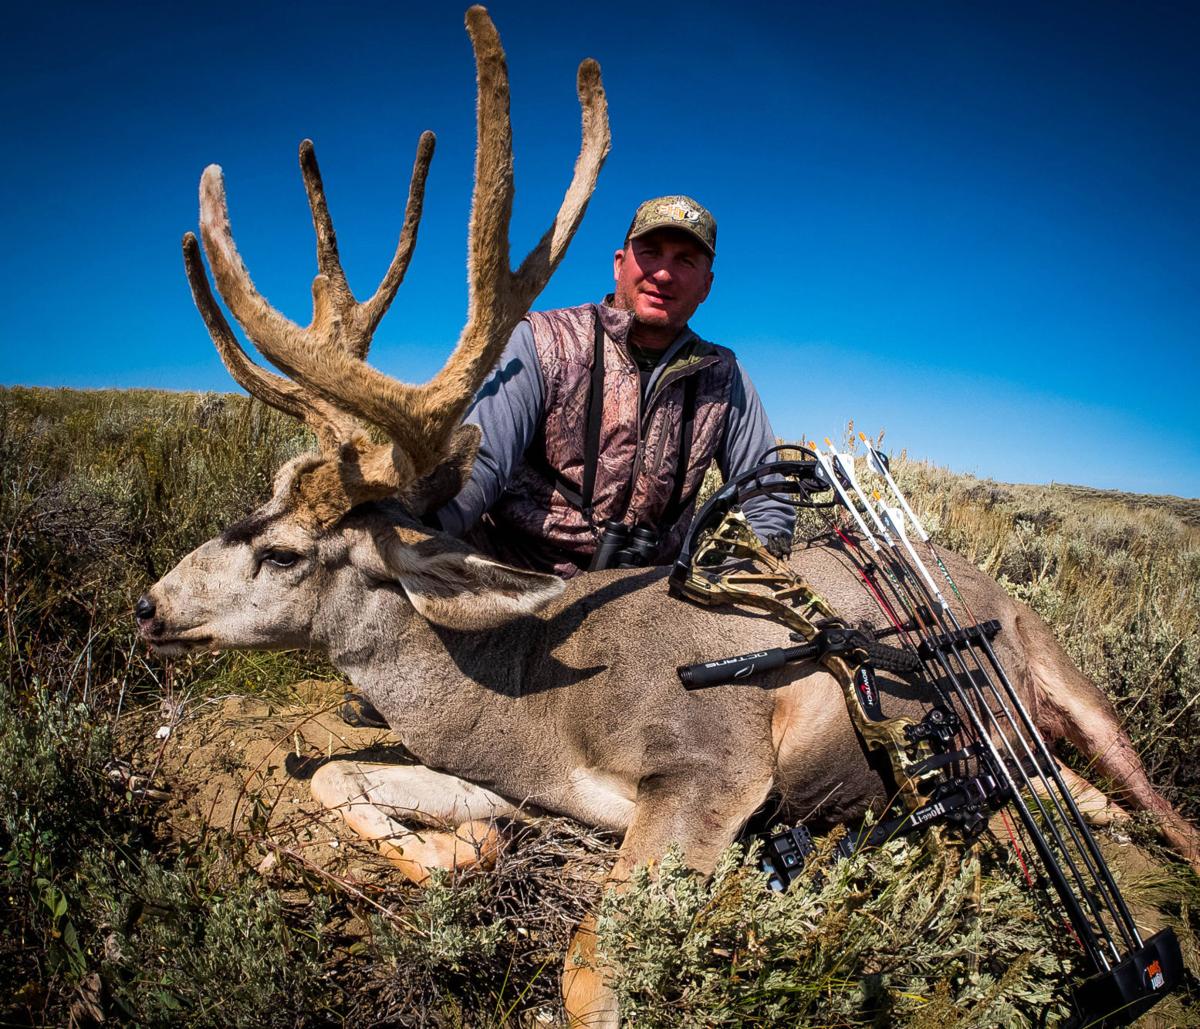 Guy Eastman reflects on family's history and evolution of hunting media ...